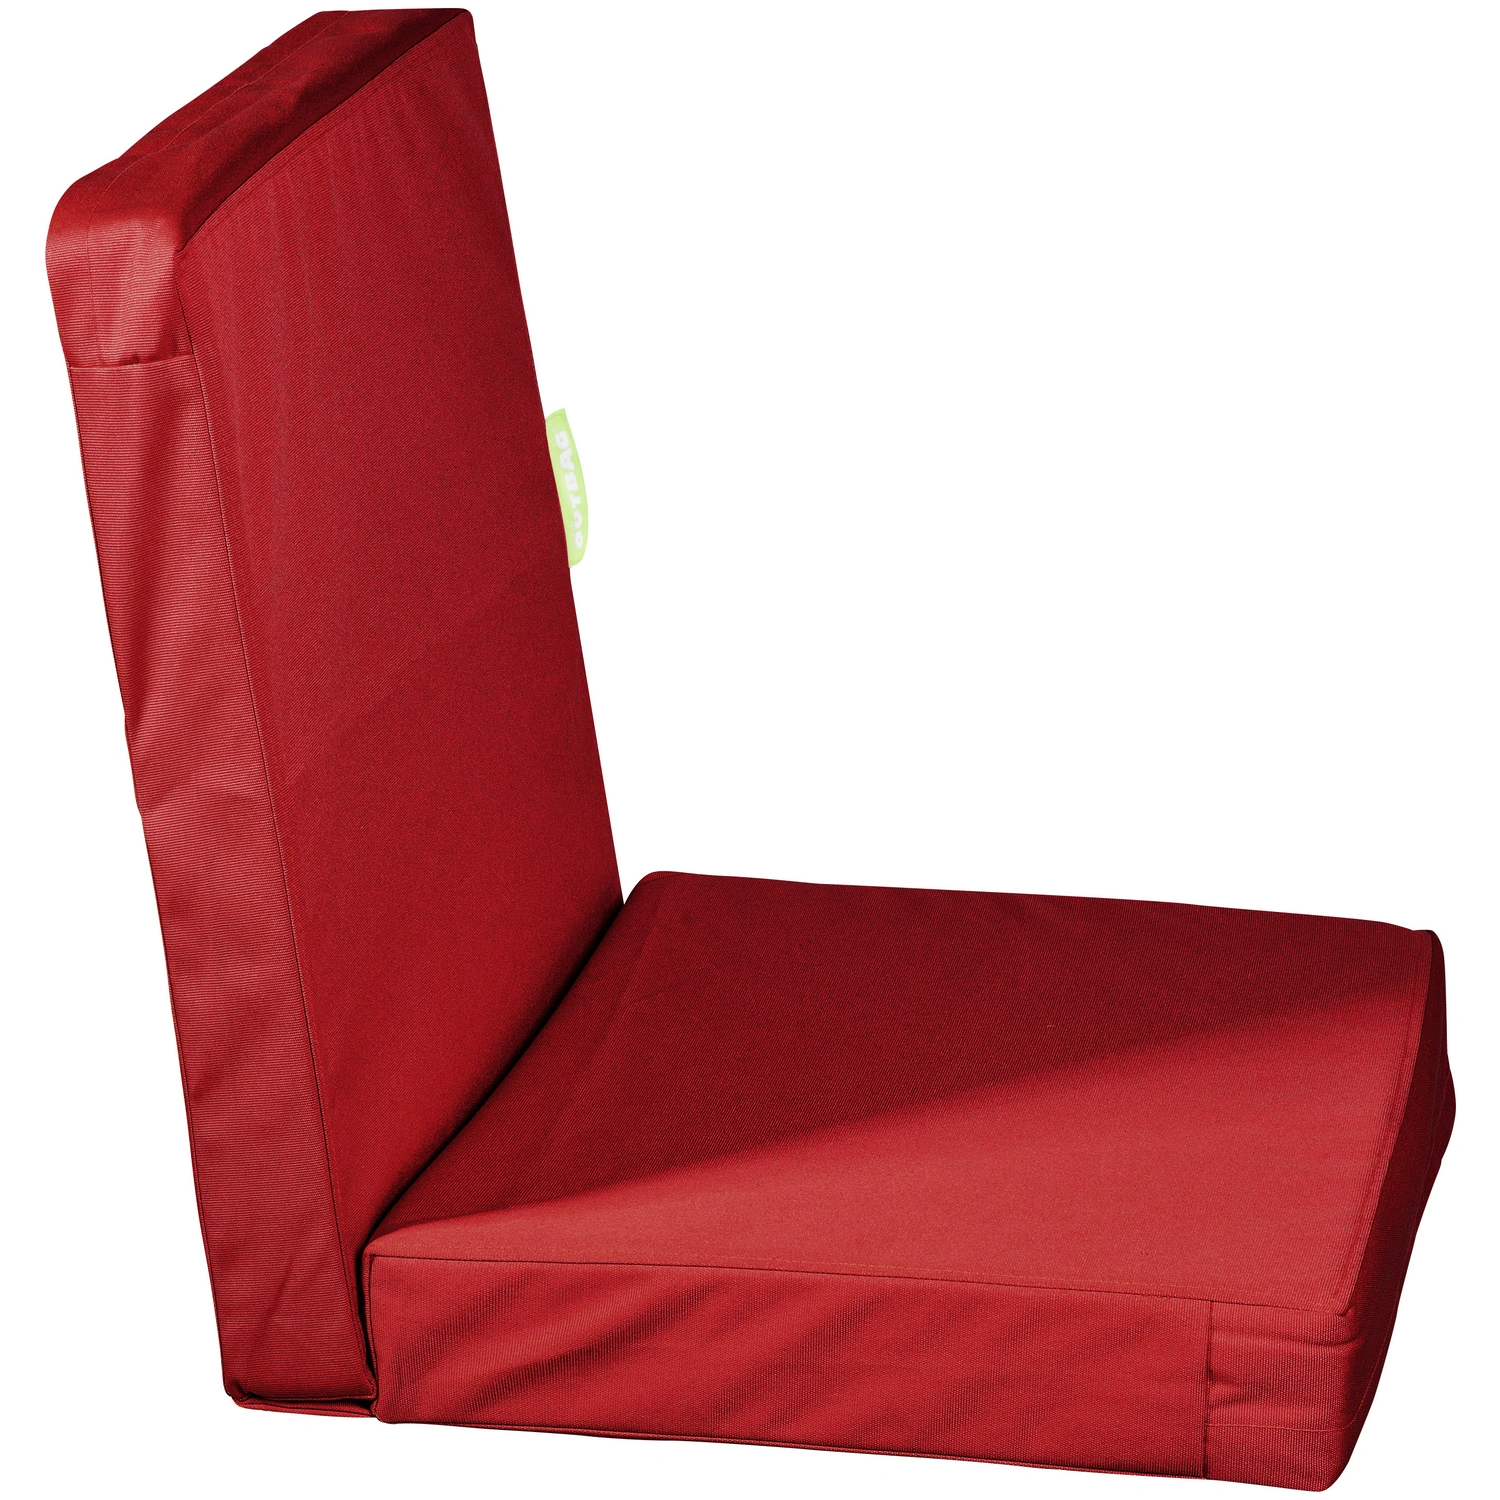 x Plus«, Sesselauflage rot, 50 »HighRise OUTBAG BxL: cm 105